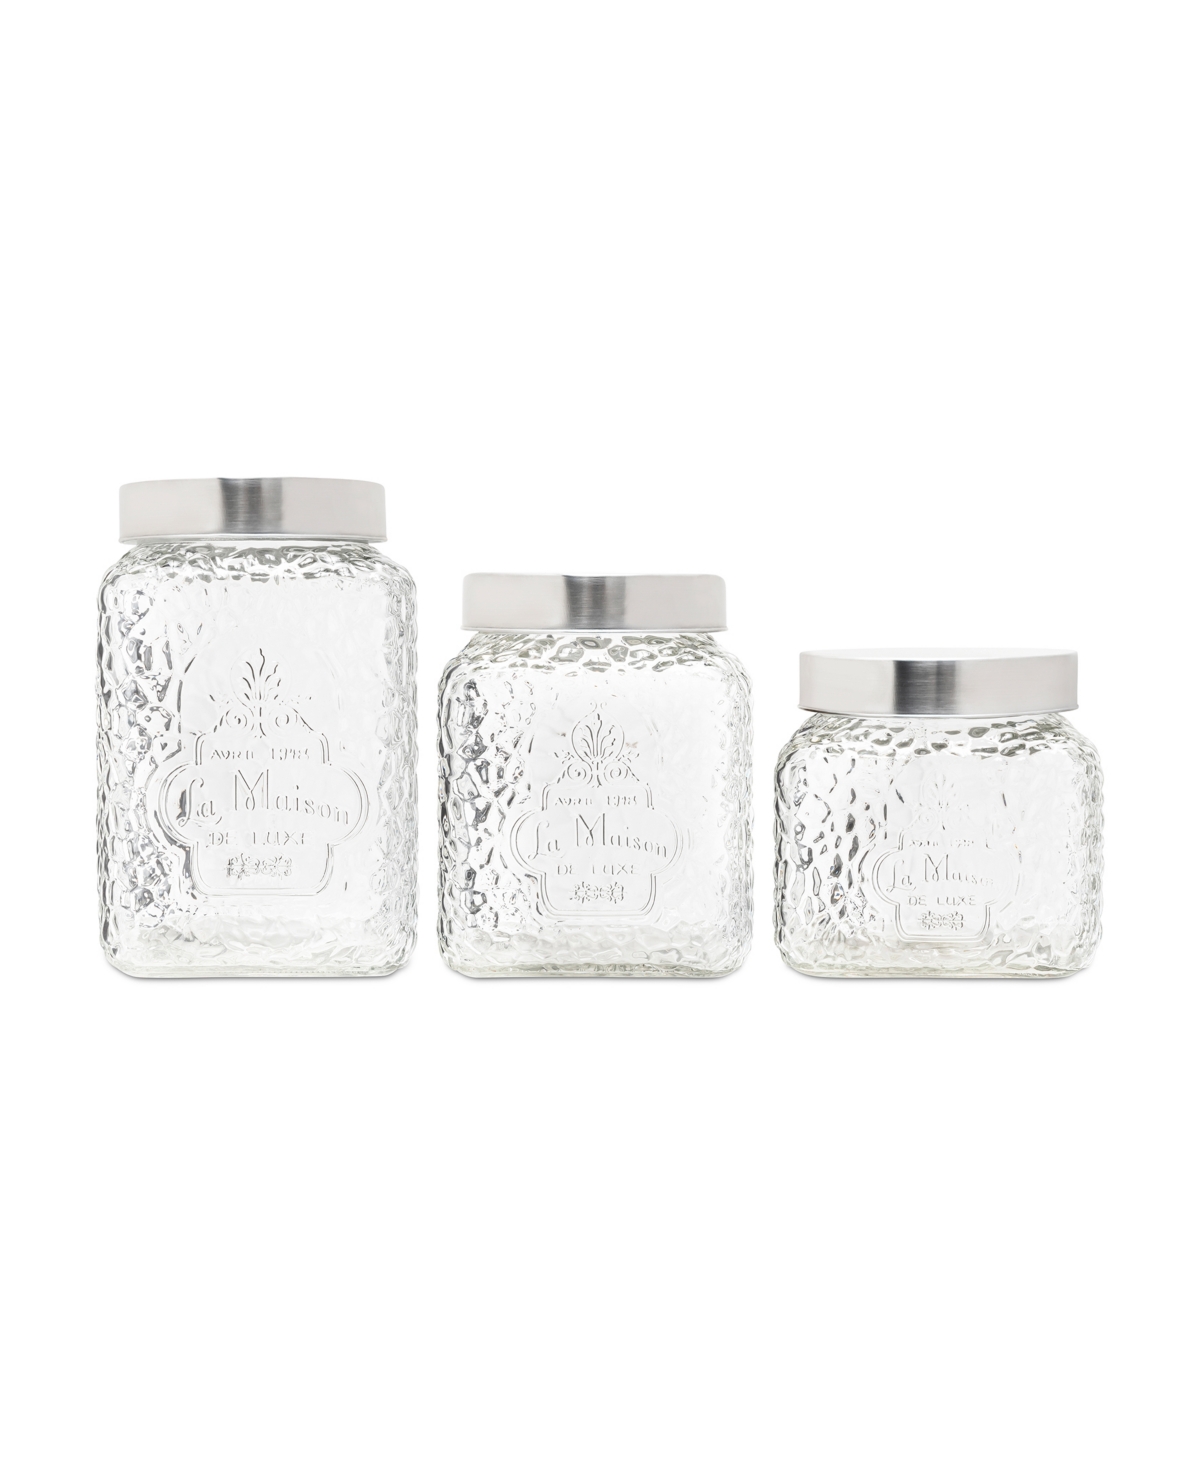 AMERICAN ATELIER LA MAISON HAMMERED GLASS CANISTERS SET, 3 PIECE